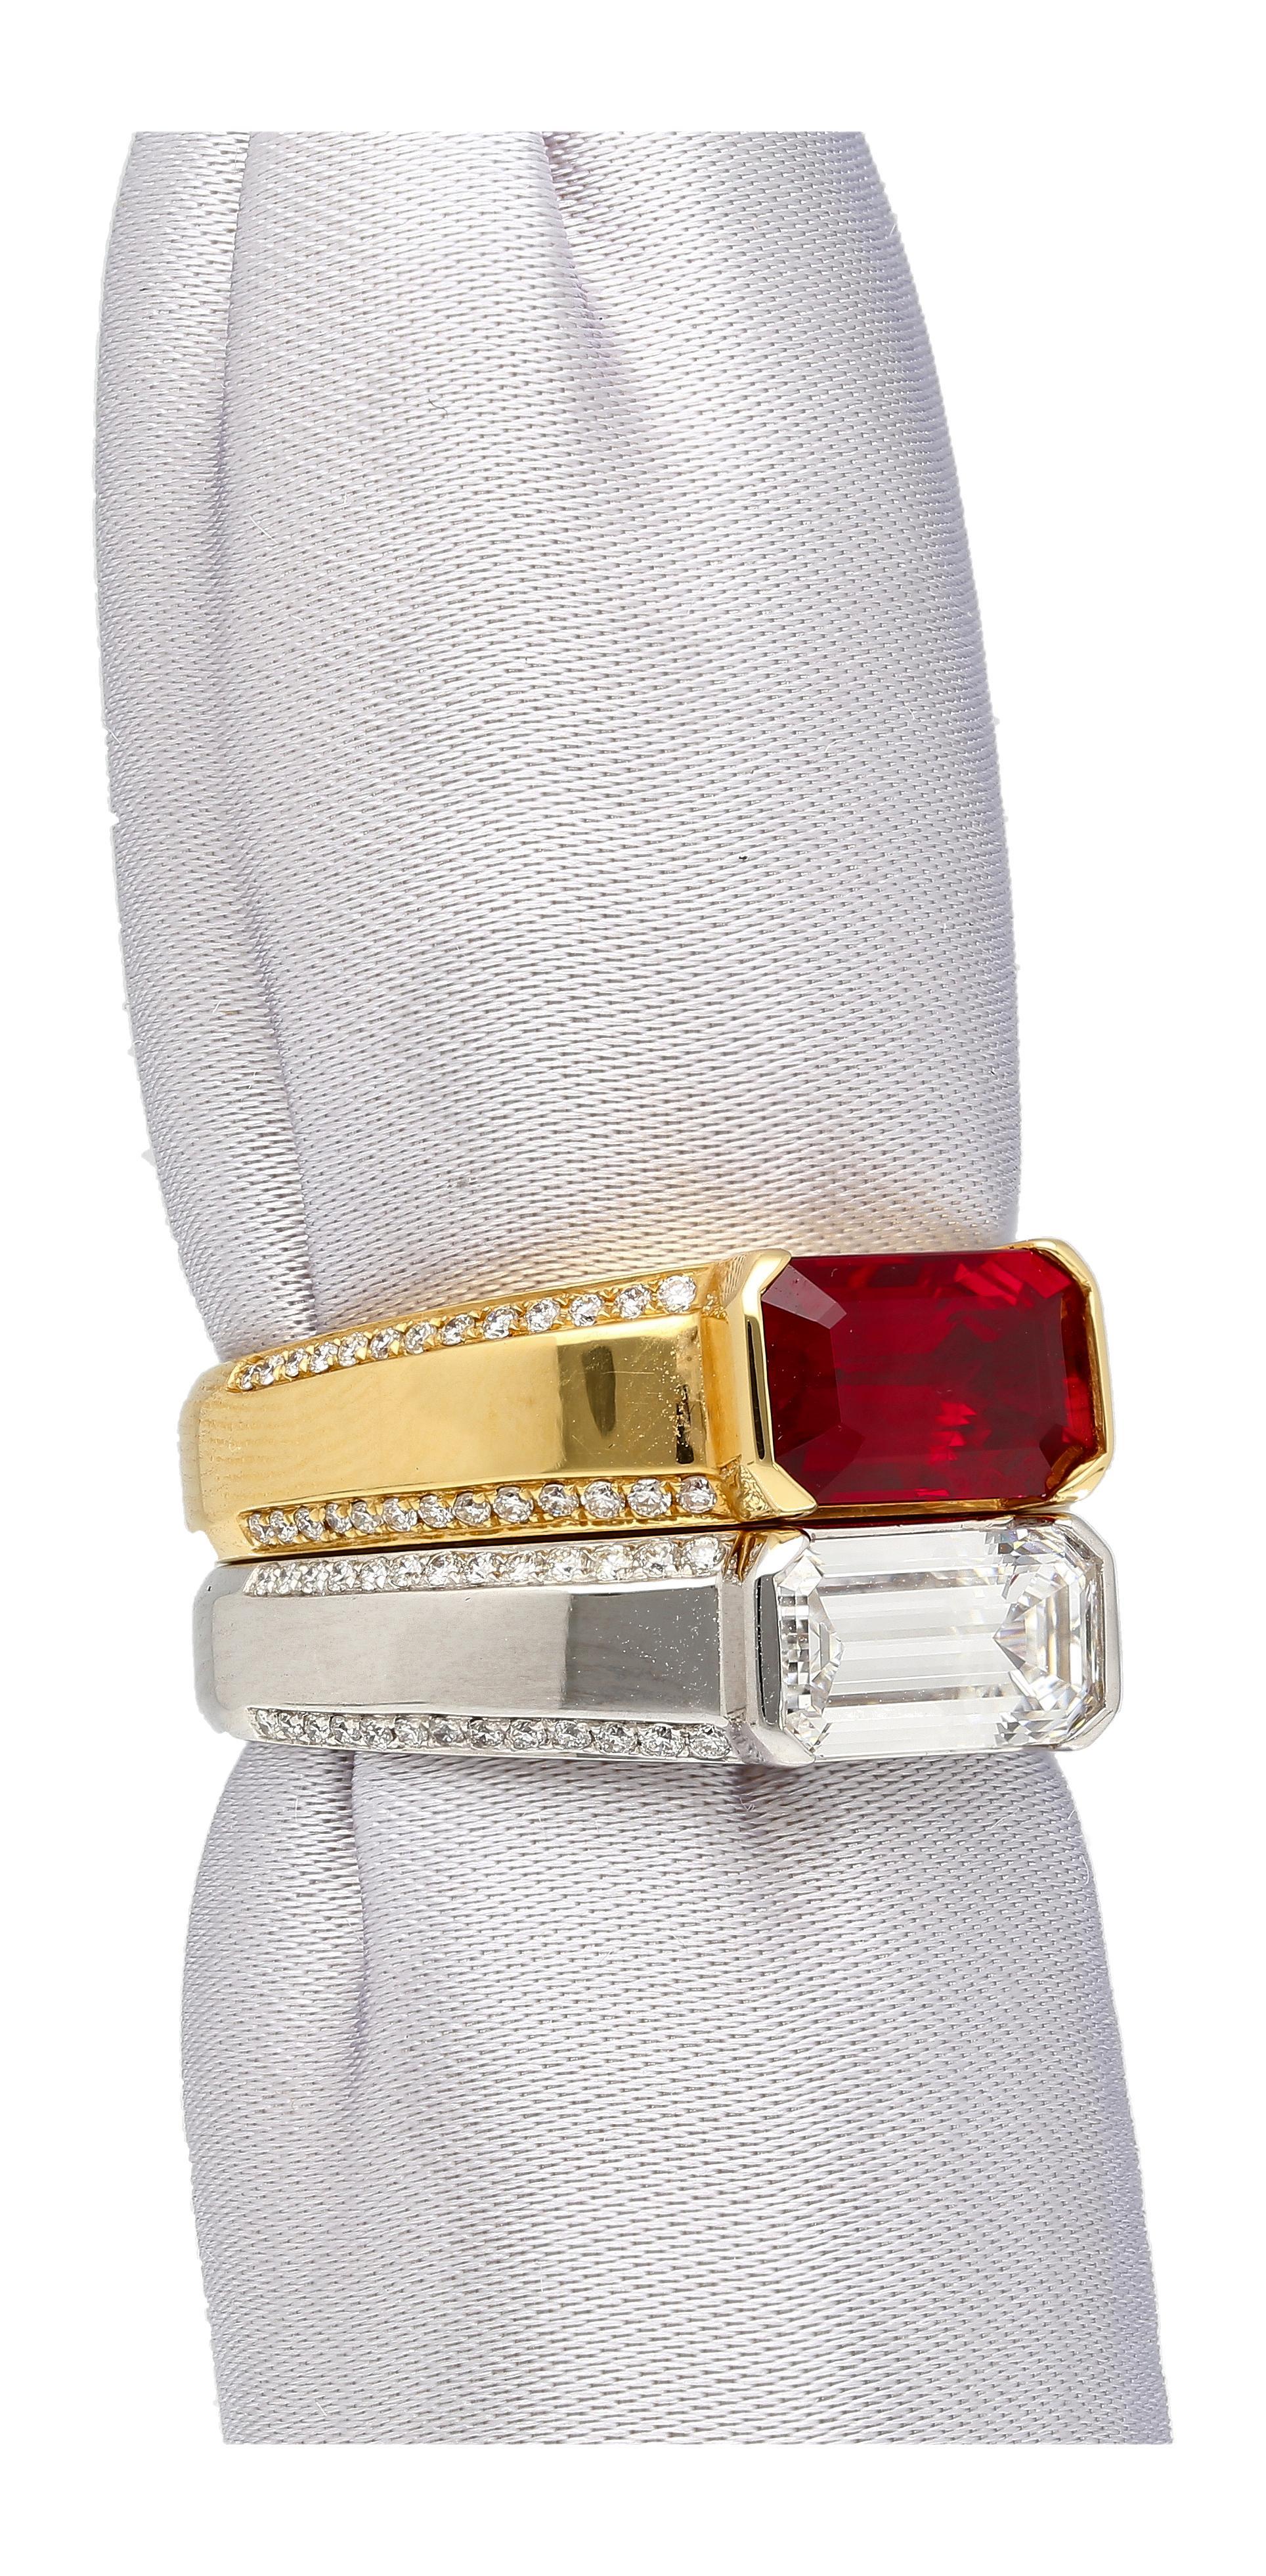 2.09 Carat Vivid Red Pigeon's Blood Burma Ruby Emerald Cut East-West Ring For Sale 1